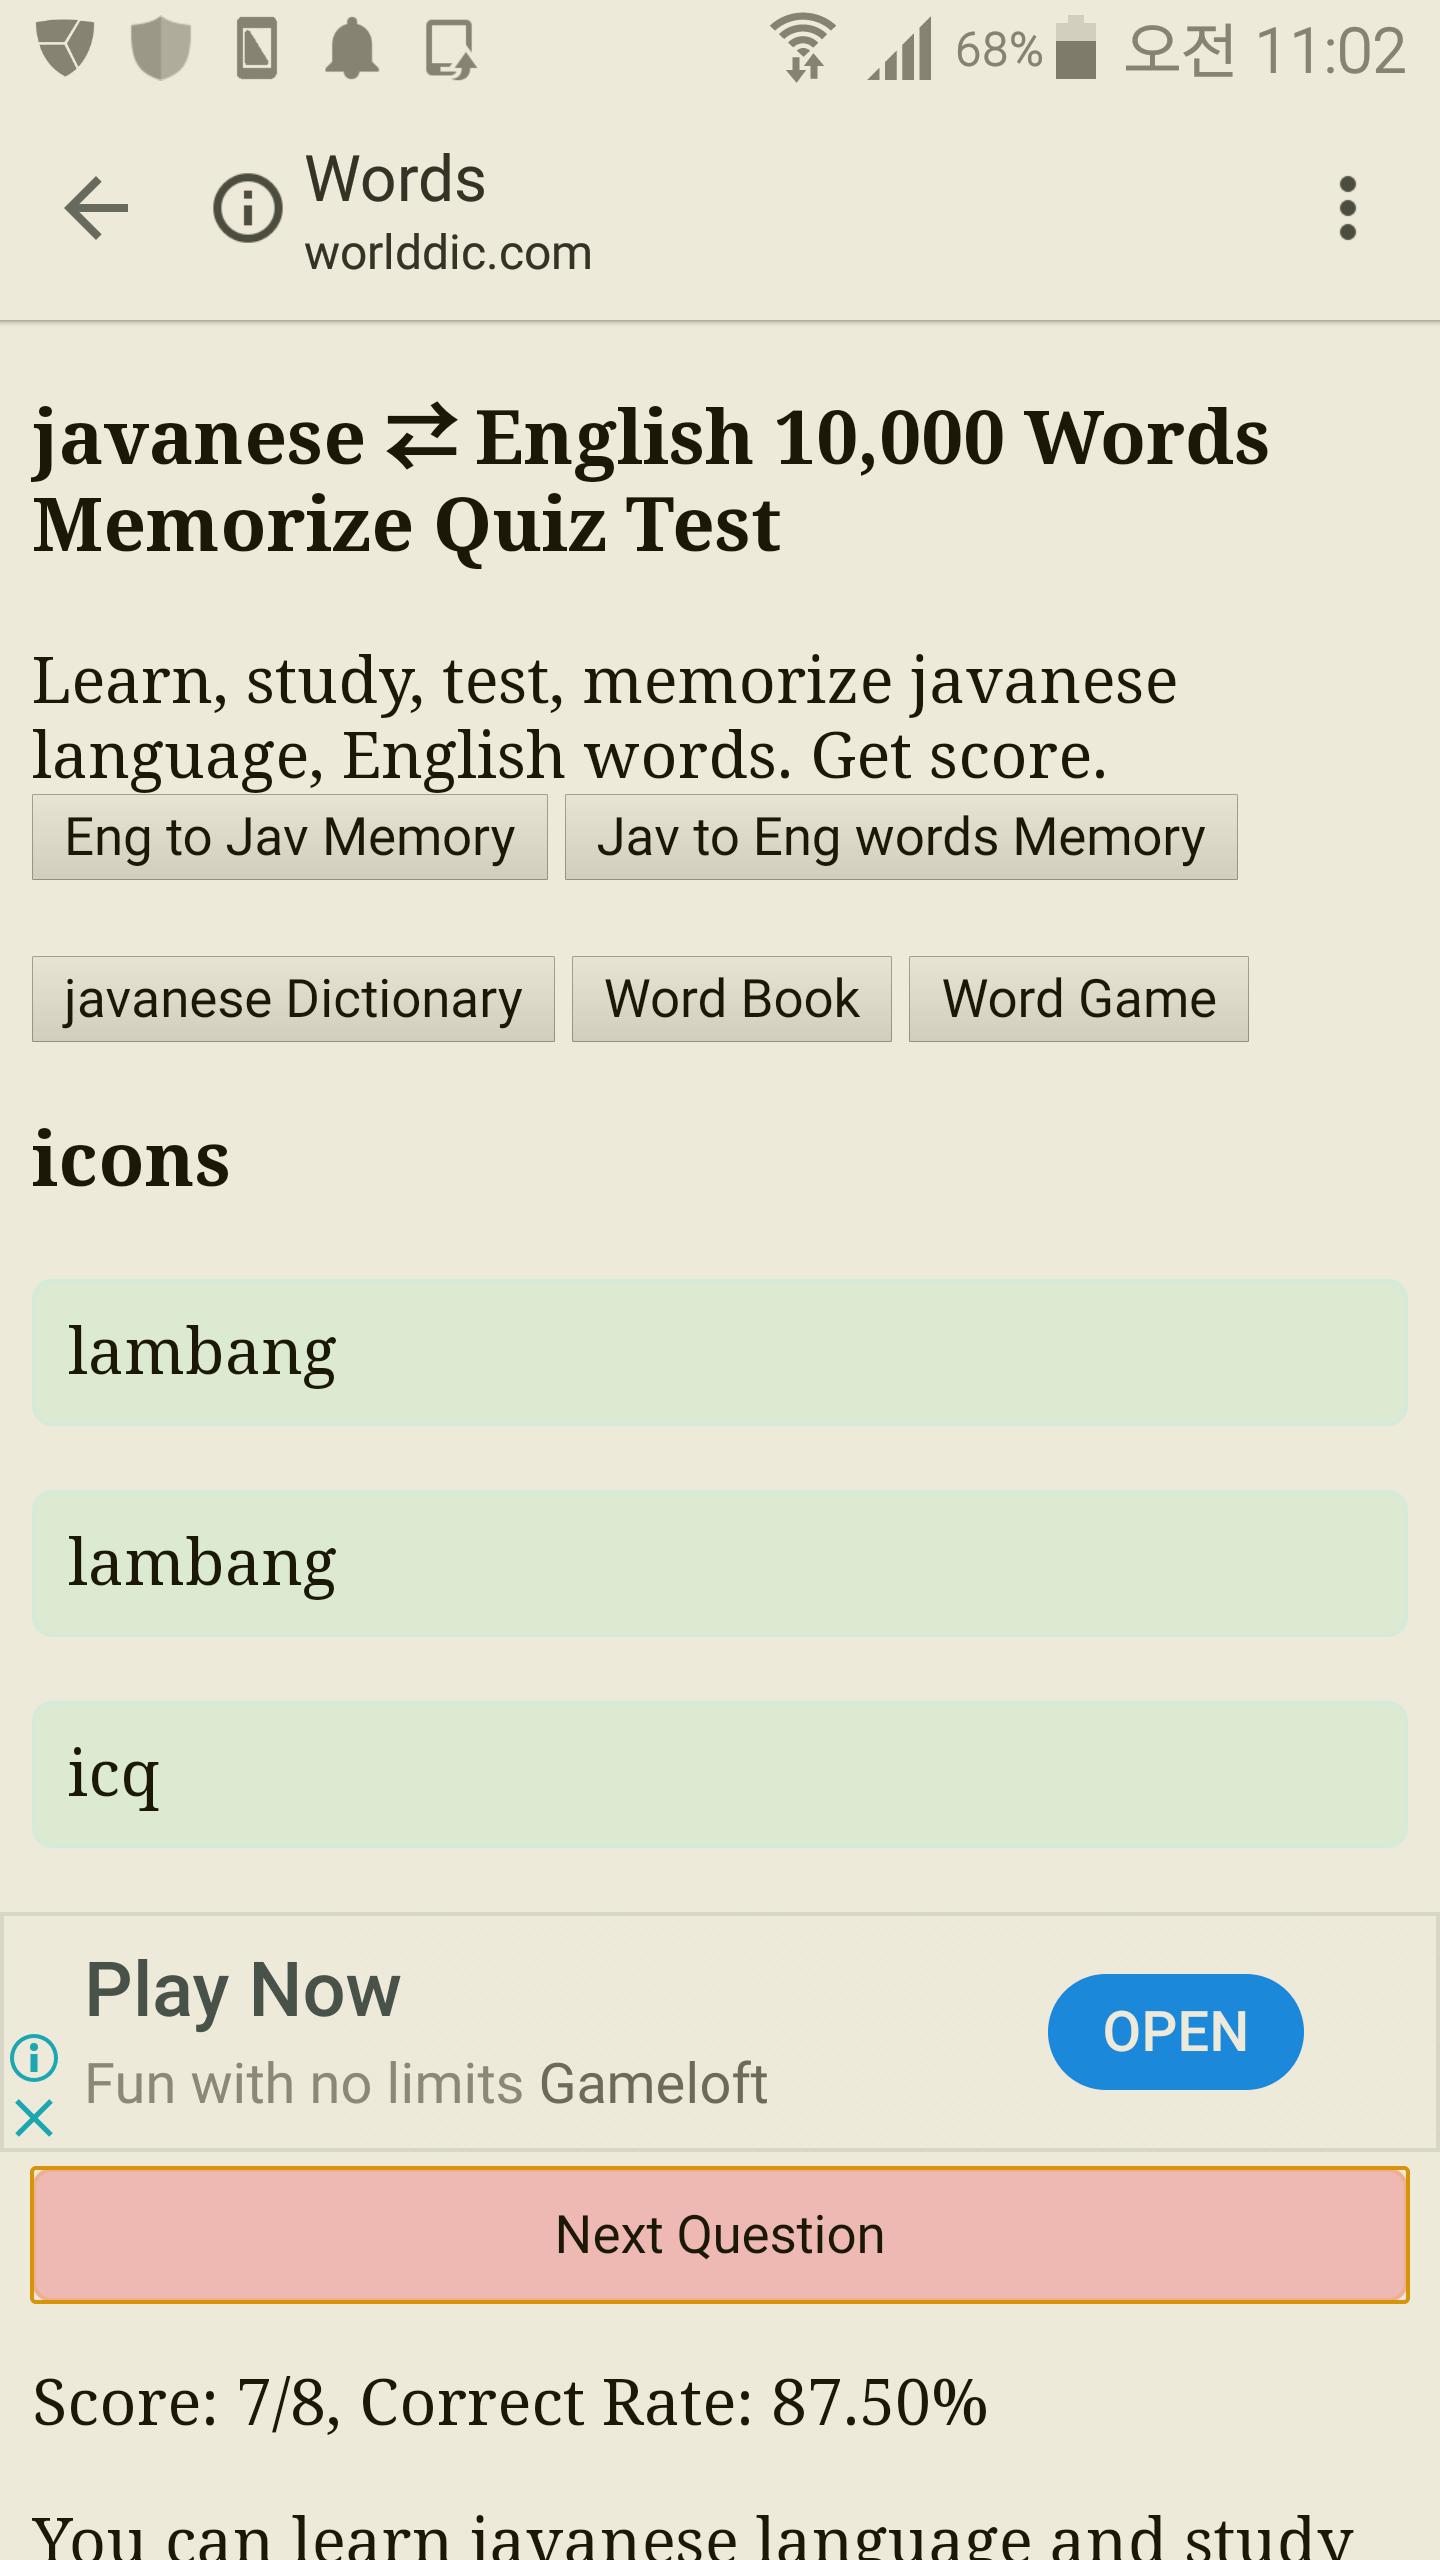 Memorize Javanese Frequently Used Words Quiz Test For Android Apk Download